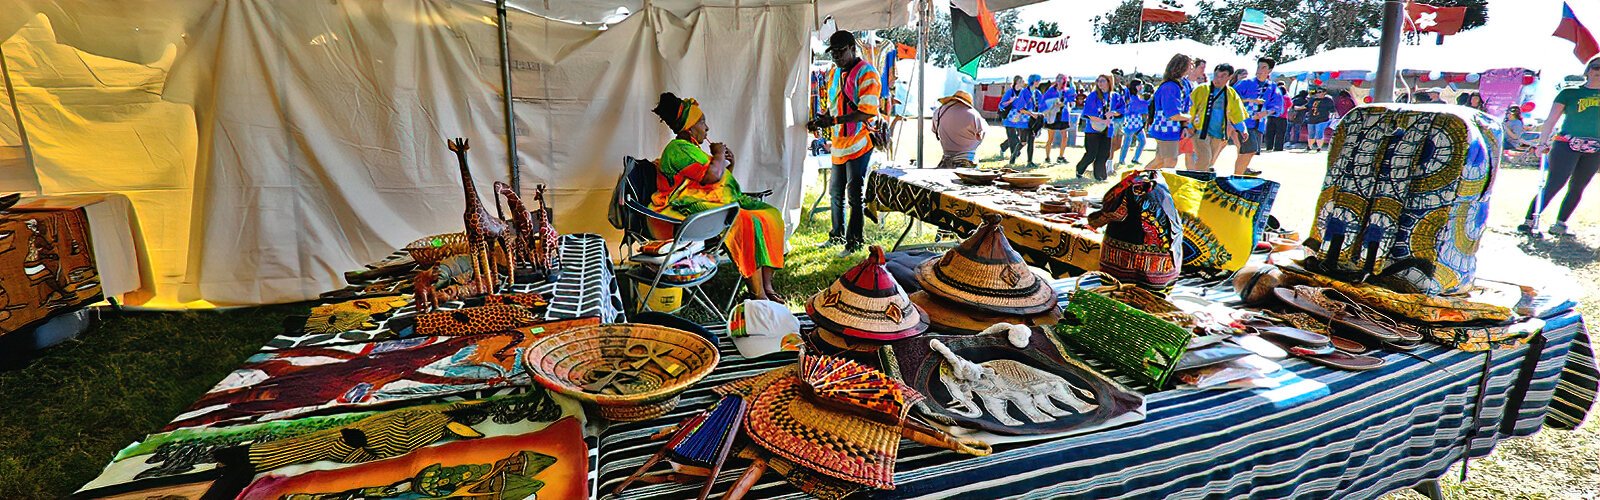  Arts and crafts from Africa were available for purchase at the African American booth. The fair offered cultural displays, tasty foods and entertainment from around the world.